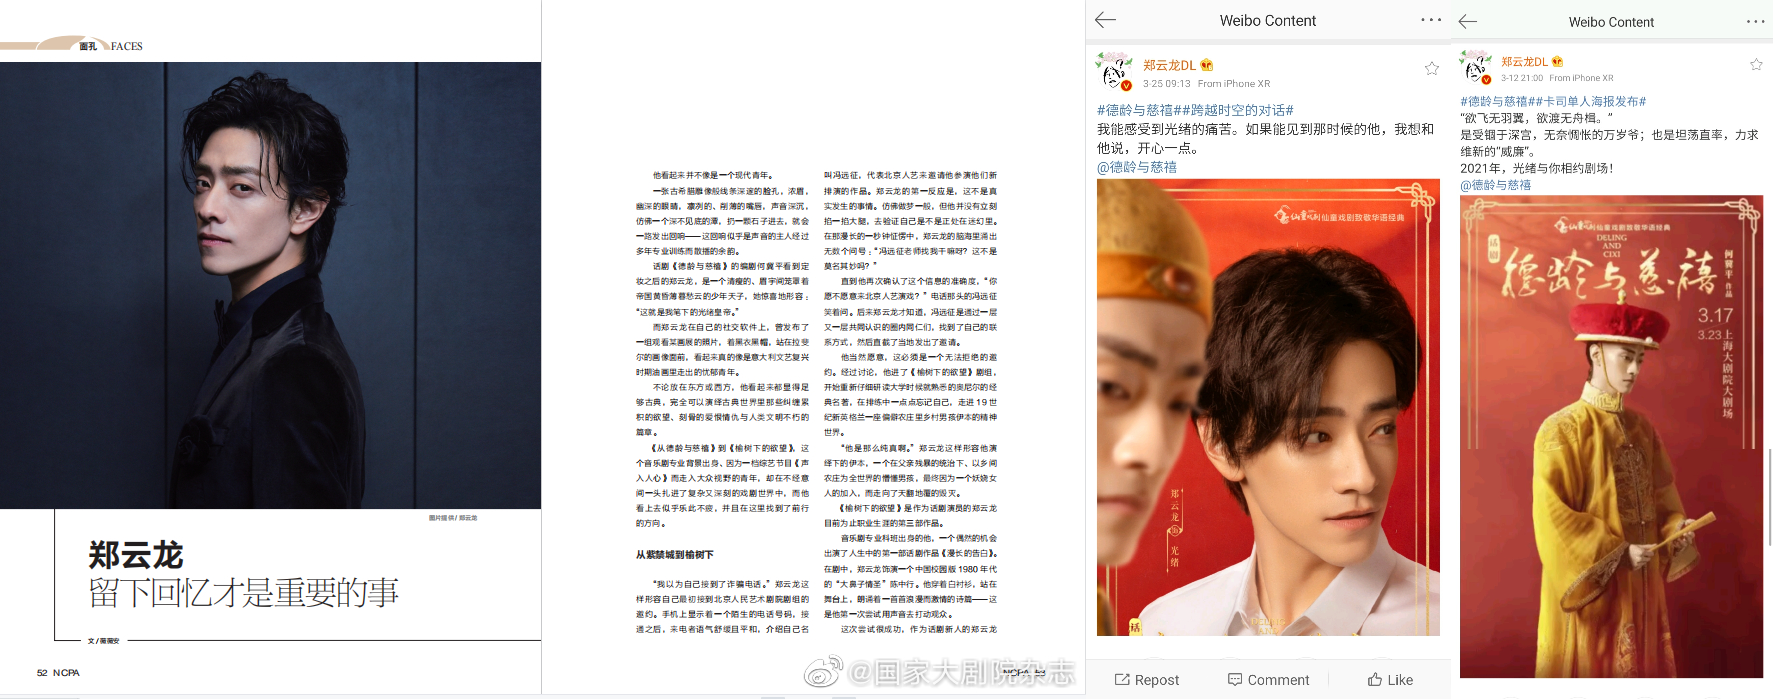 A series of screenshots of articles and Weibo posts. The furthest left has a photograph of Yunlong, shown in profile and gazing soulfully at the camera, above a title and subheading in Chinese. The second-left is the text of the interview. The two right-hand screenshots are Weibo posts, one with a photograph of Yunlong in normal dress, and in the foreground, a blurred partial shot of his face in costume as the emperor Yunlong. The other Weibo post displays one of the promotional photographs from Figure 1, of Yunlong in gold holding a fan and looking pensive.